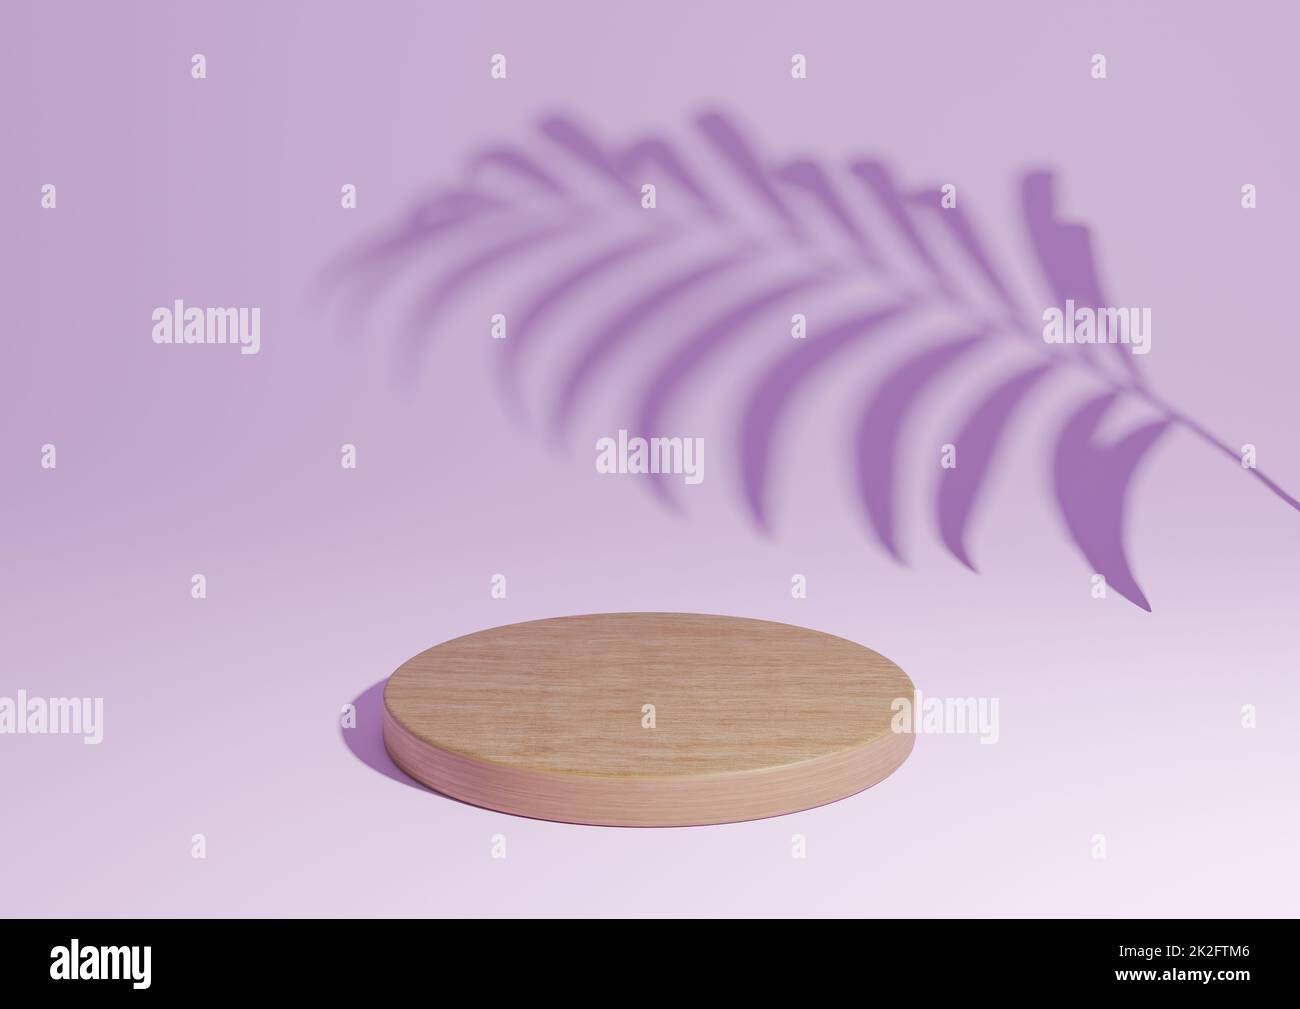 Light, pastel, lavender purple simple 3D render minimal natural product display composition with one wood podium or stand with palm leaf shadow in the background Stock Photo